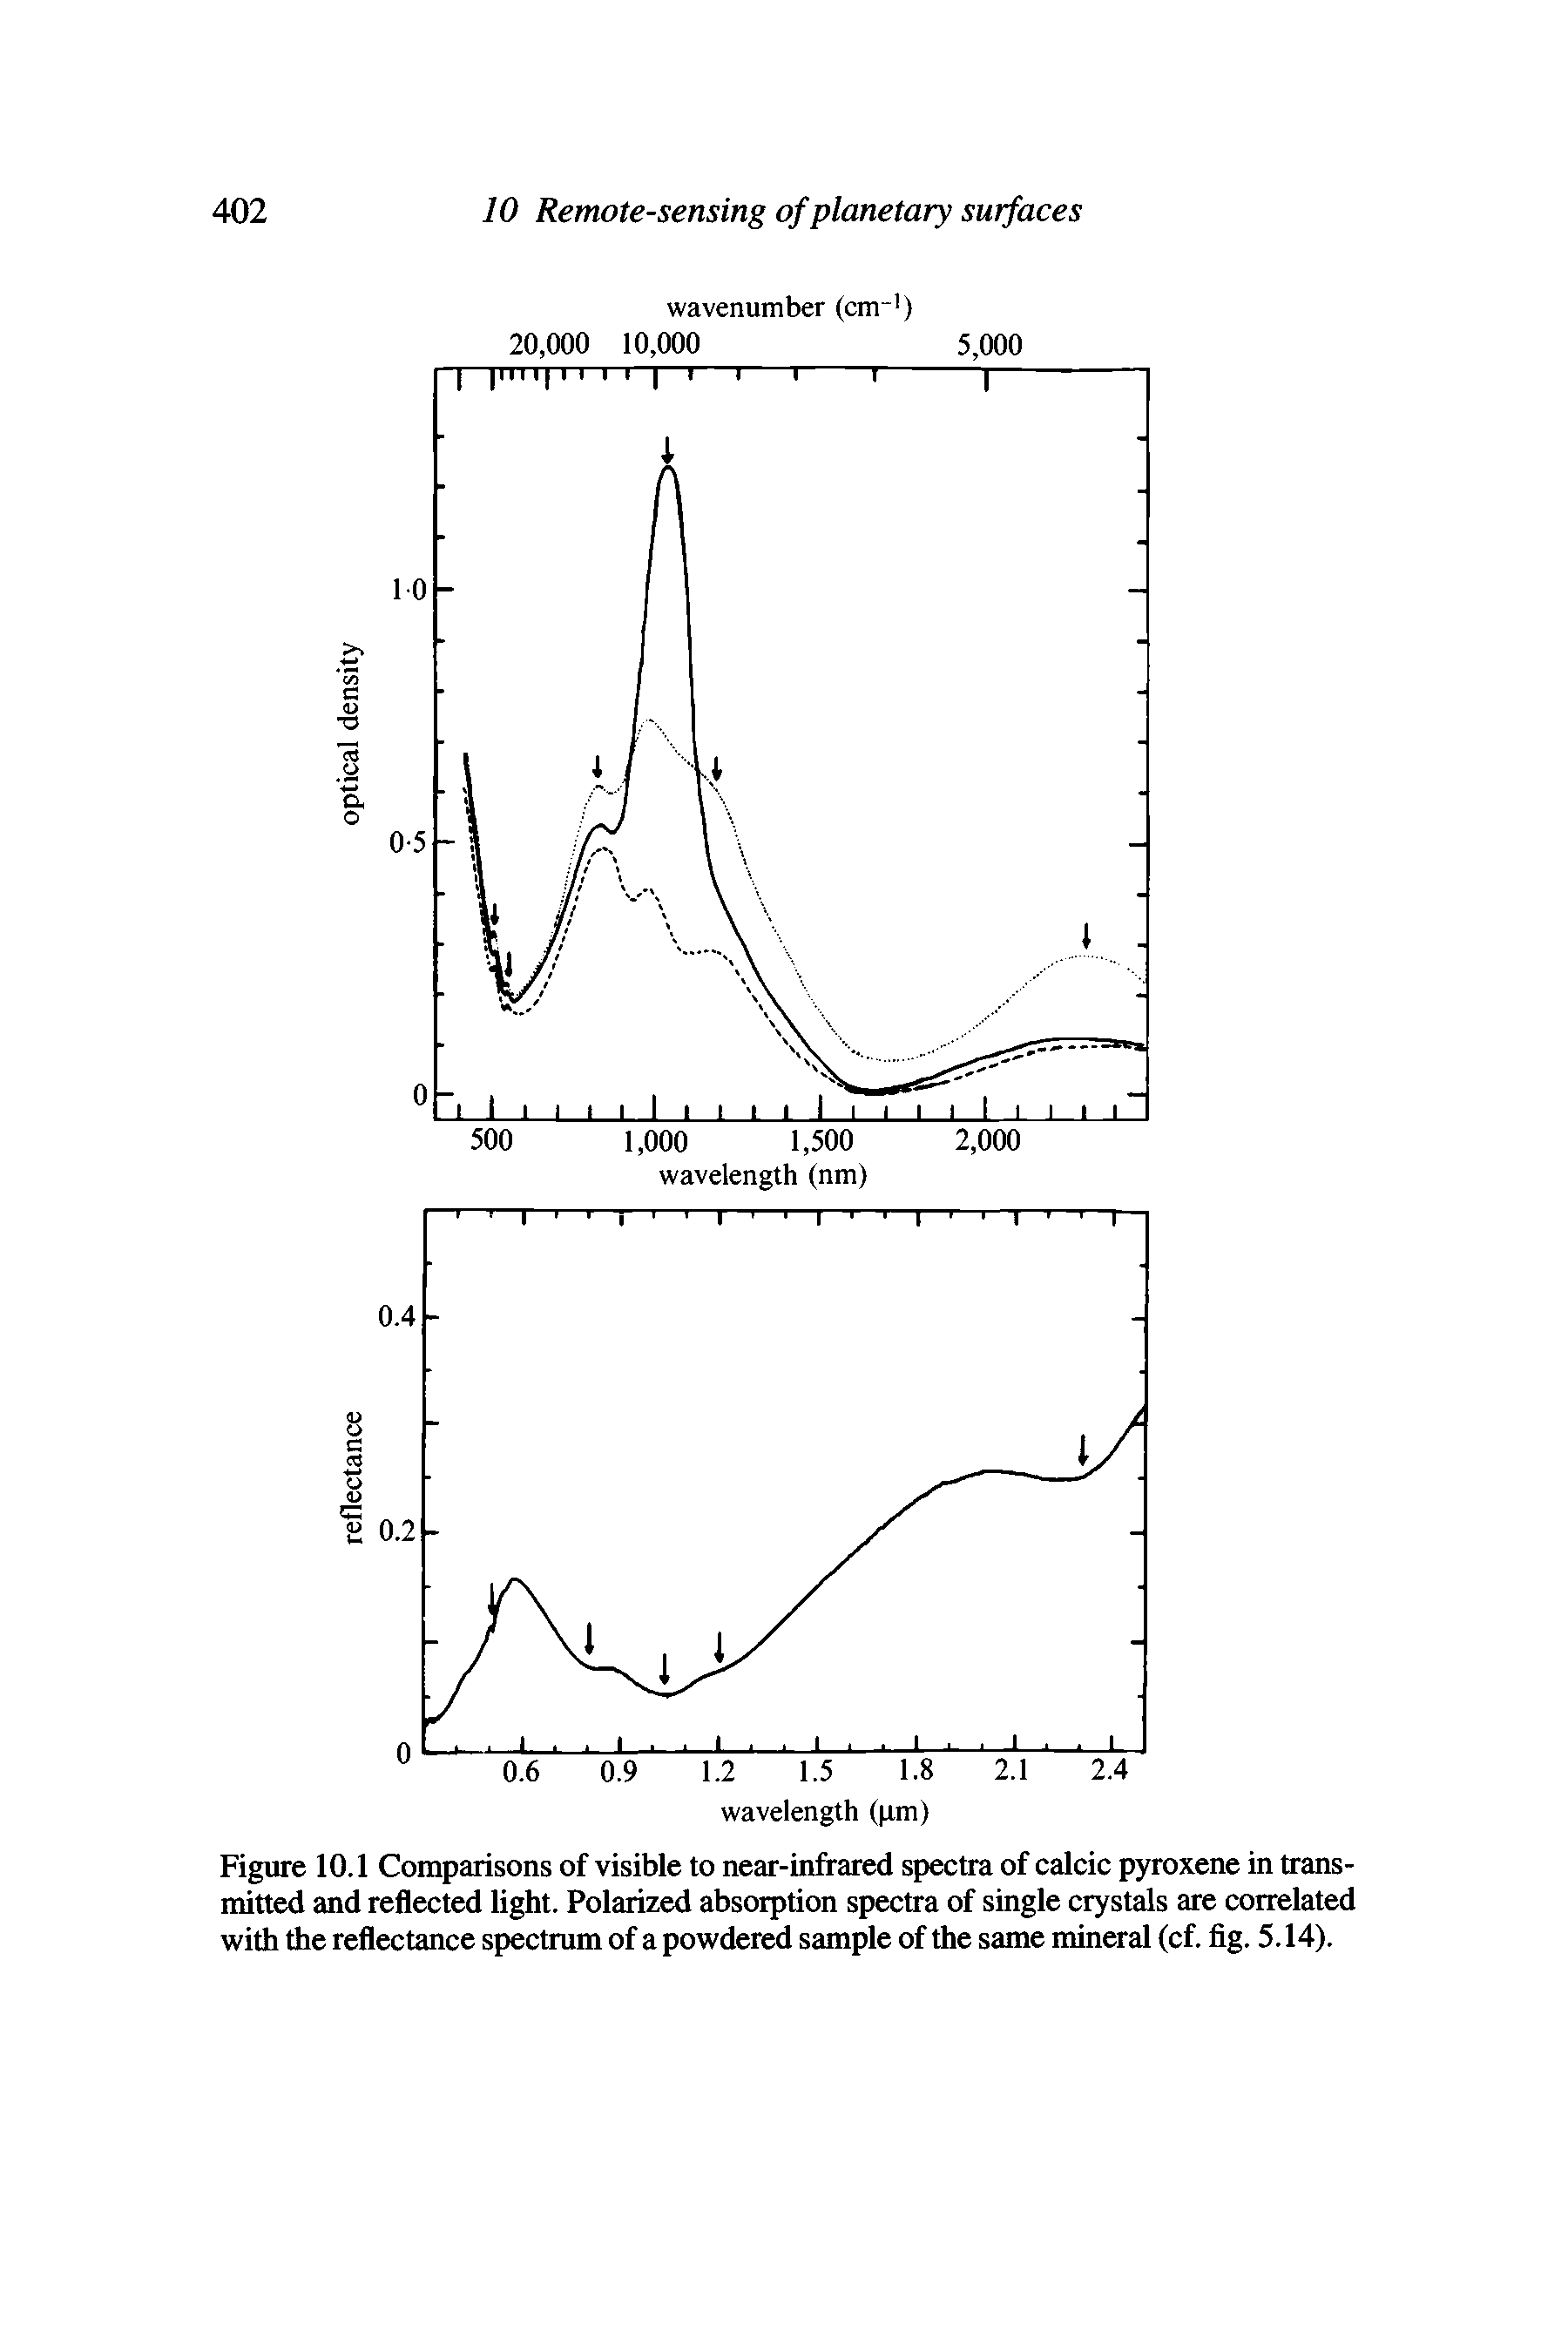 Figure 10.1 Comparisons of visible to near-infrared spectra of calcic pyroxene in transmitted and reflected light. Polarized absorption spectra of single crystals are correlated with the reflectance spectrum of a powdered sample of the same mineral (cf. fig. 5.14).